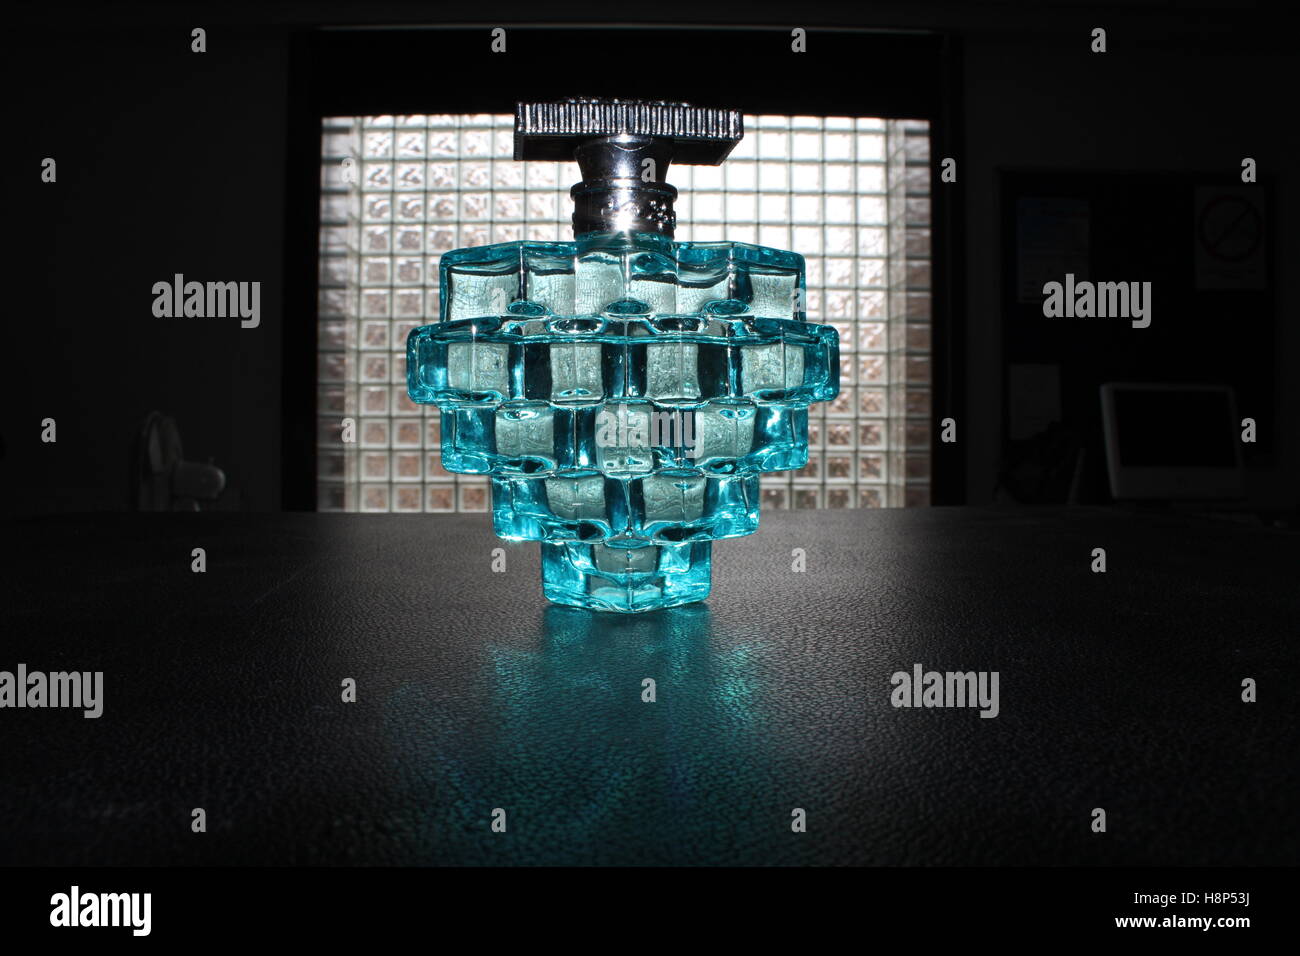 blue perfume bottle stood in front of a squared window Stock Photo